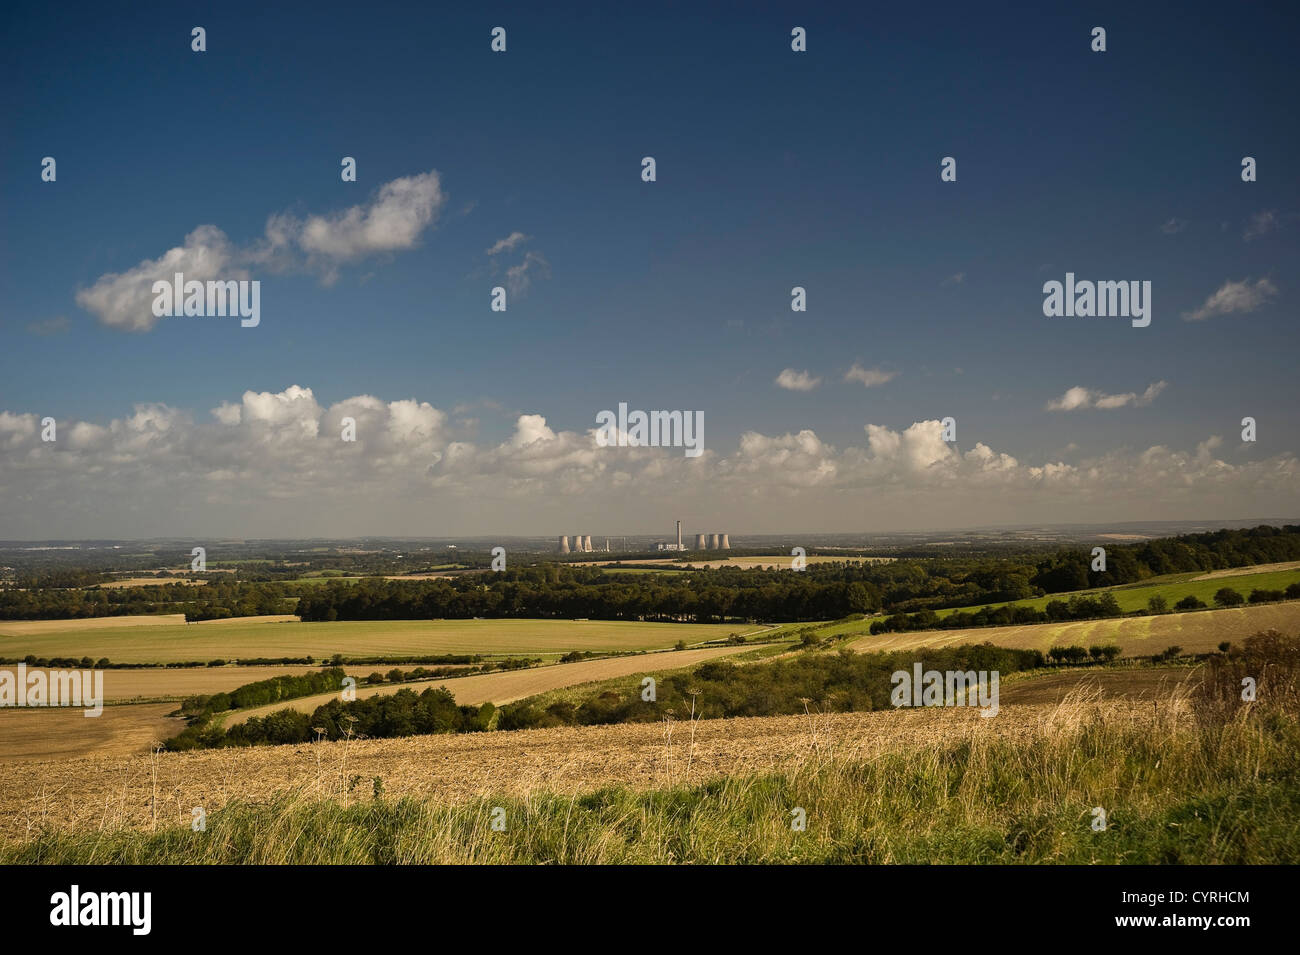 The cooling towers of Didcot Power Station viewed from The Ridgeway National Trail, Oxfordshire, UK Stock Photo